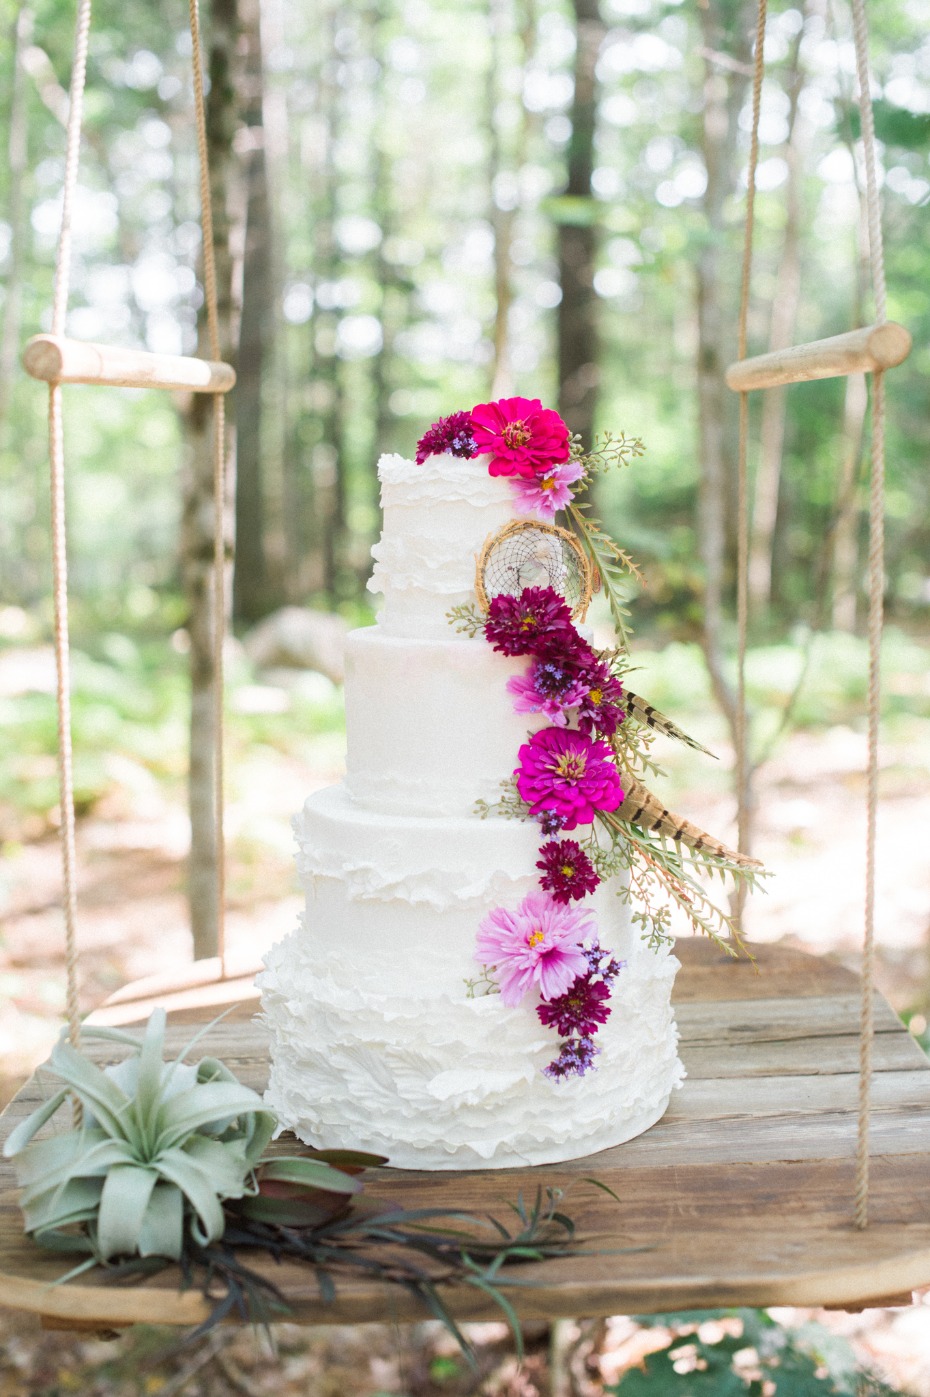 Ruffle cake with flowers, feathers and a dream catcher